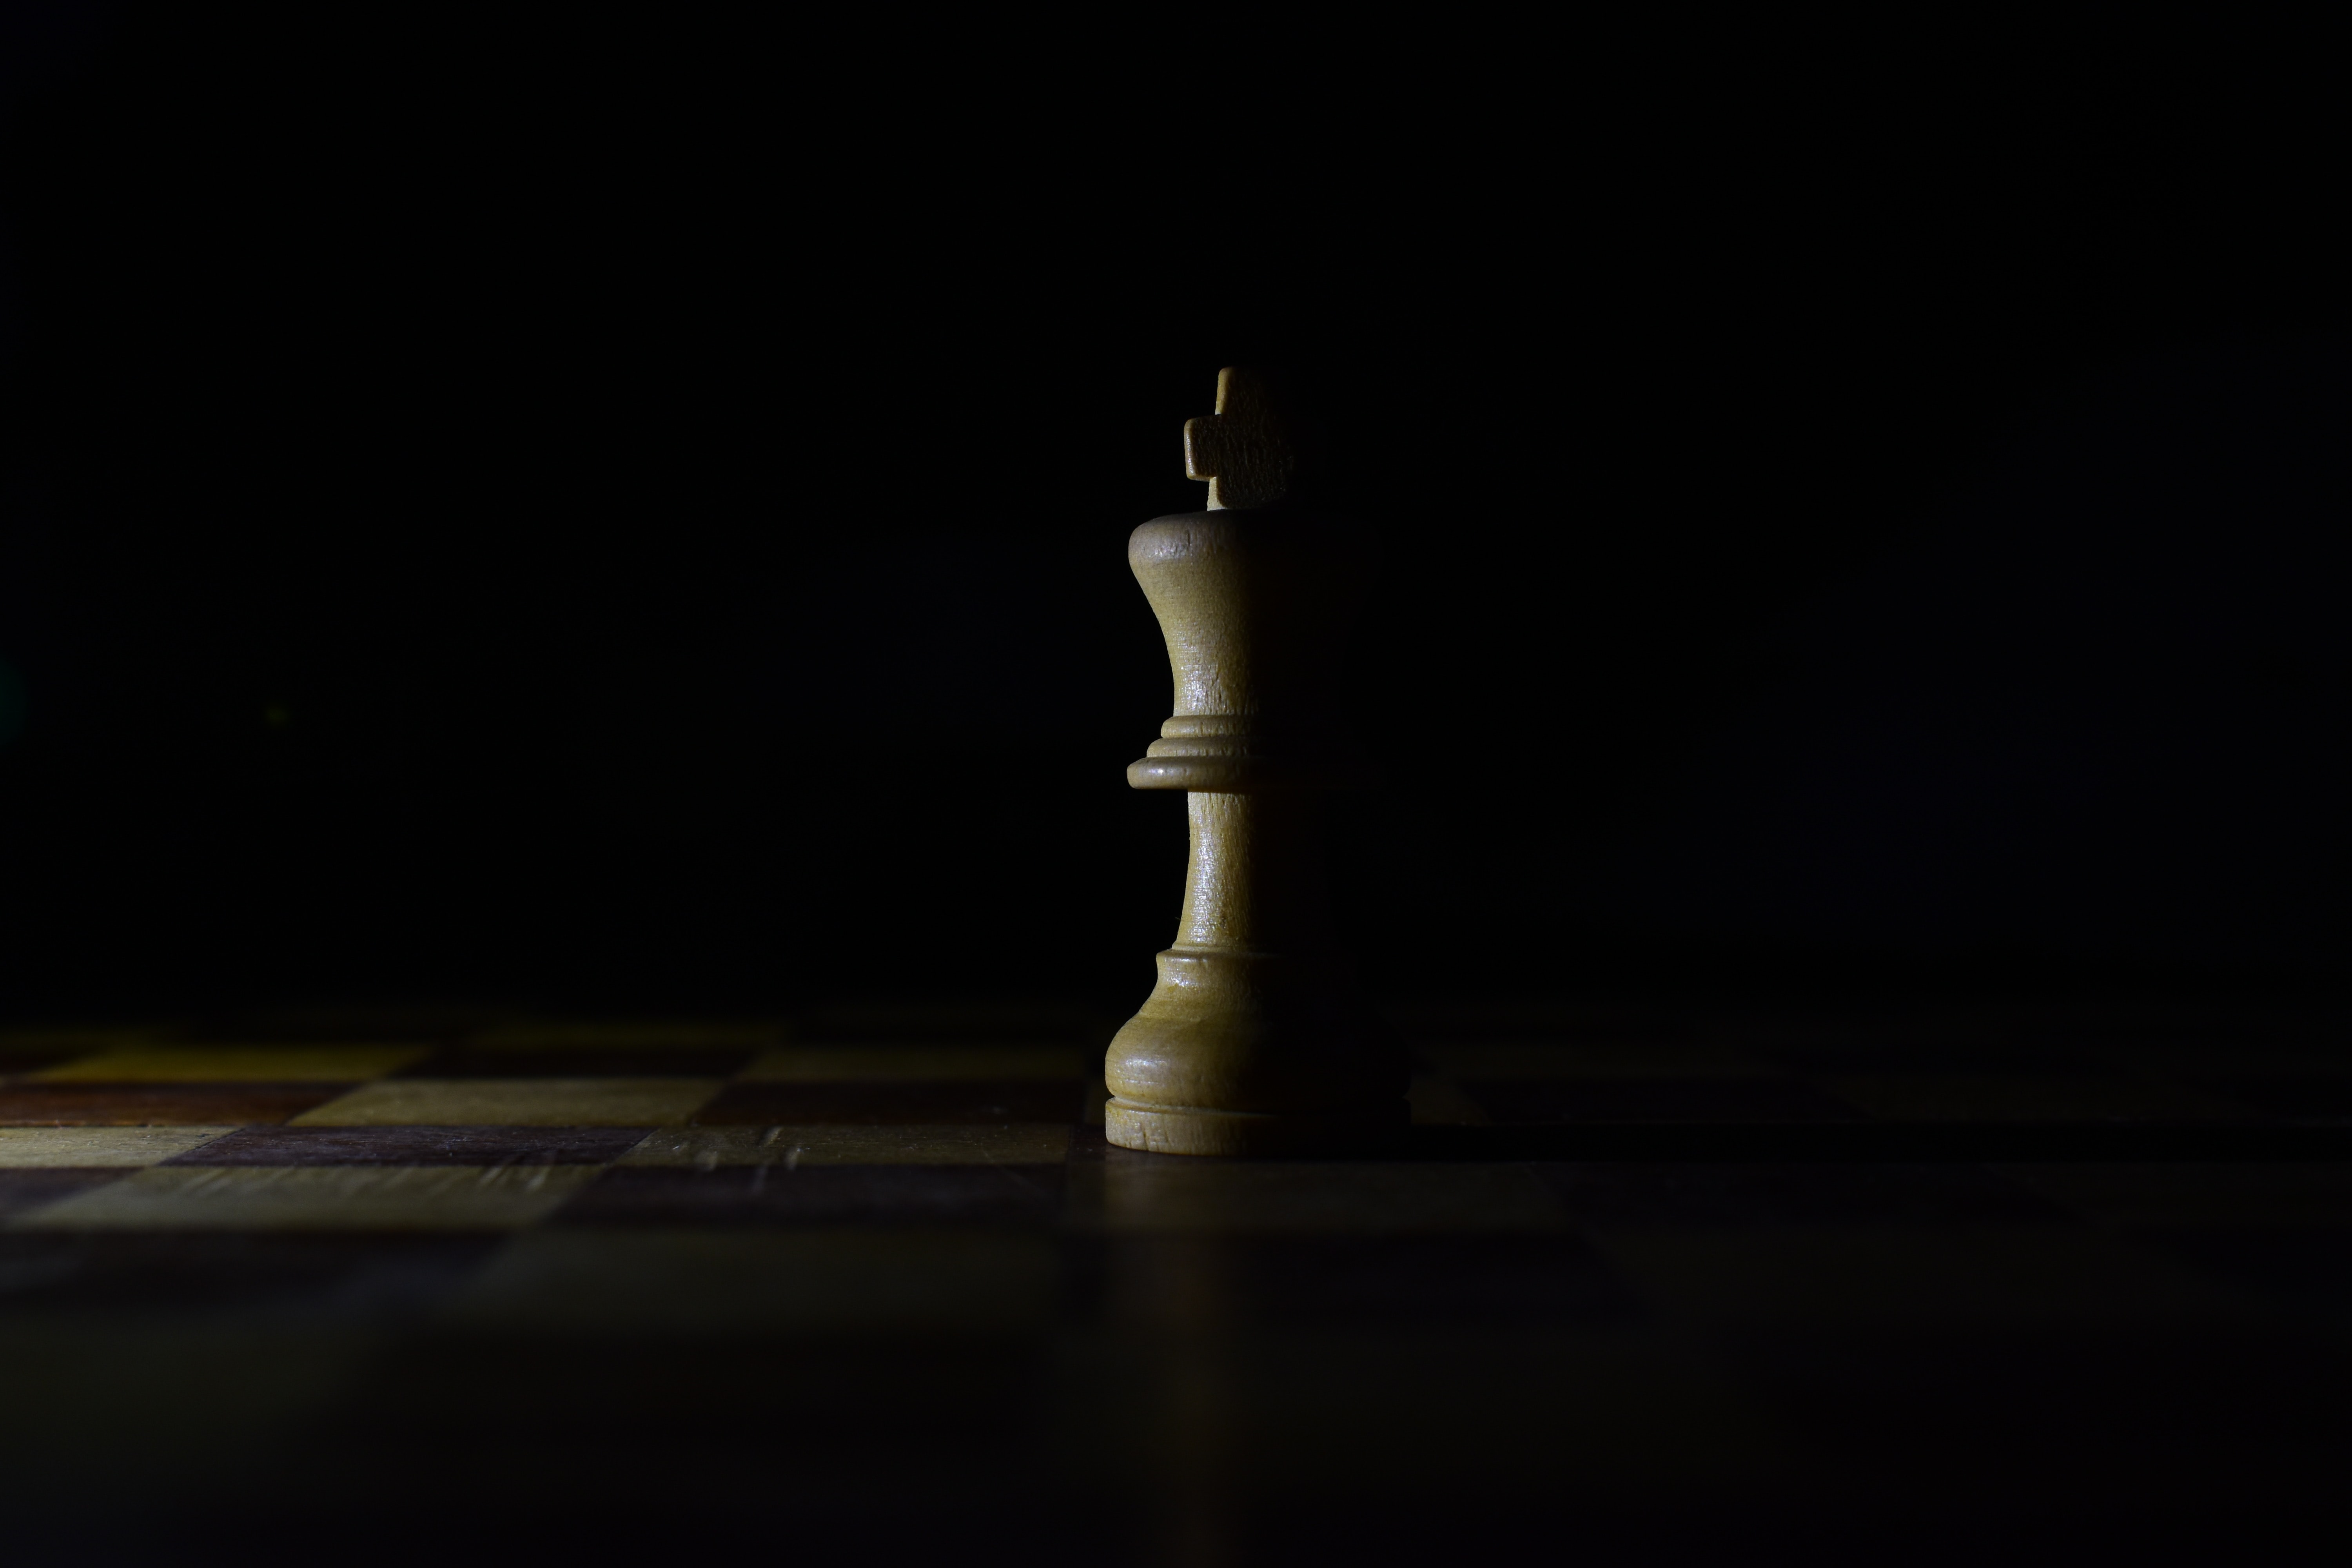 chess, shadow, king, dark, figure, game, board wallpaper for mobile